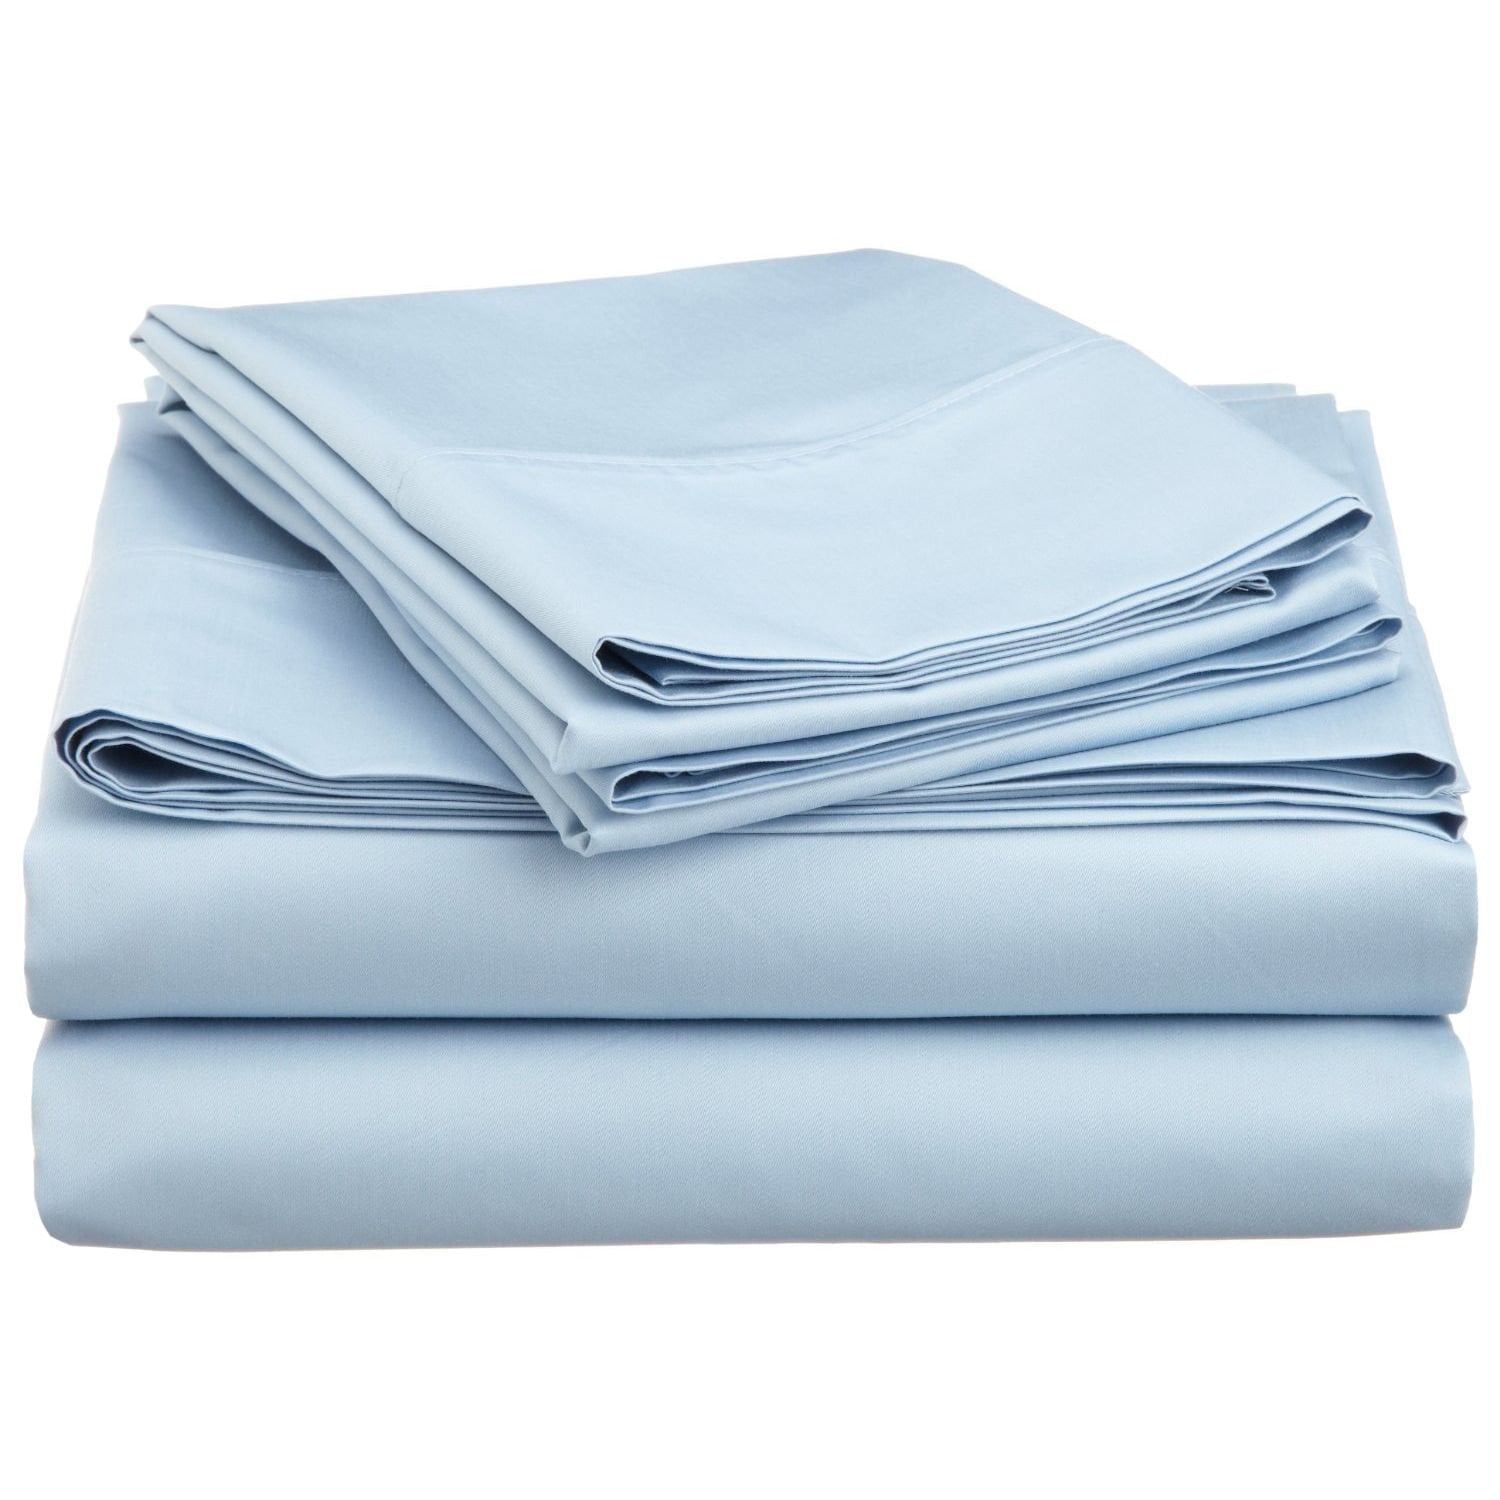 1000-Thread-Count 100% Egyptian Cotton Sheet Set King Size Fits 19-24 Inches Deep Pocket ( Solid, Beach Blue )